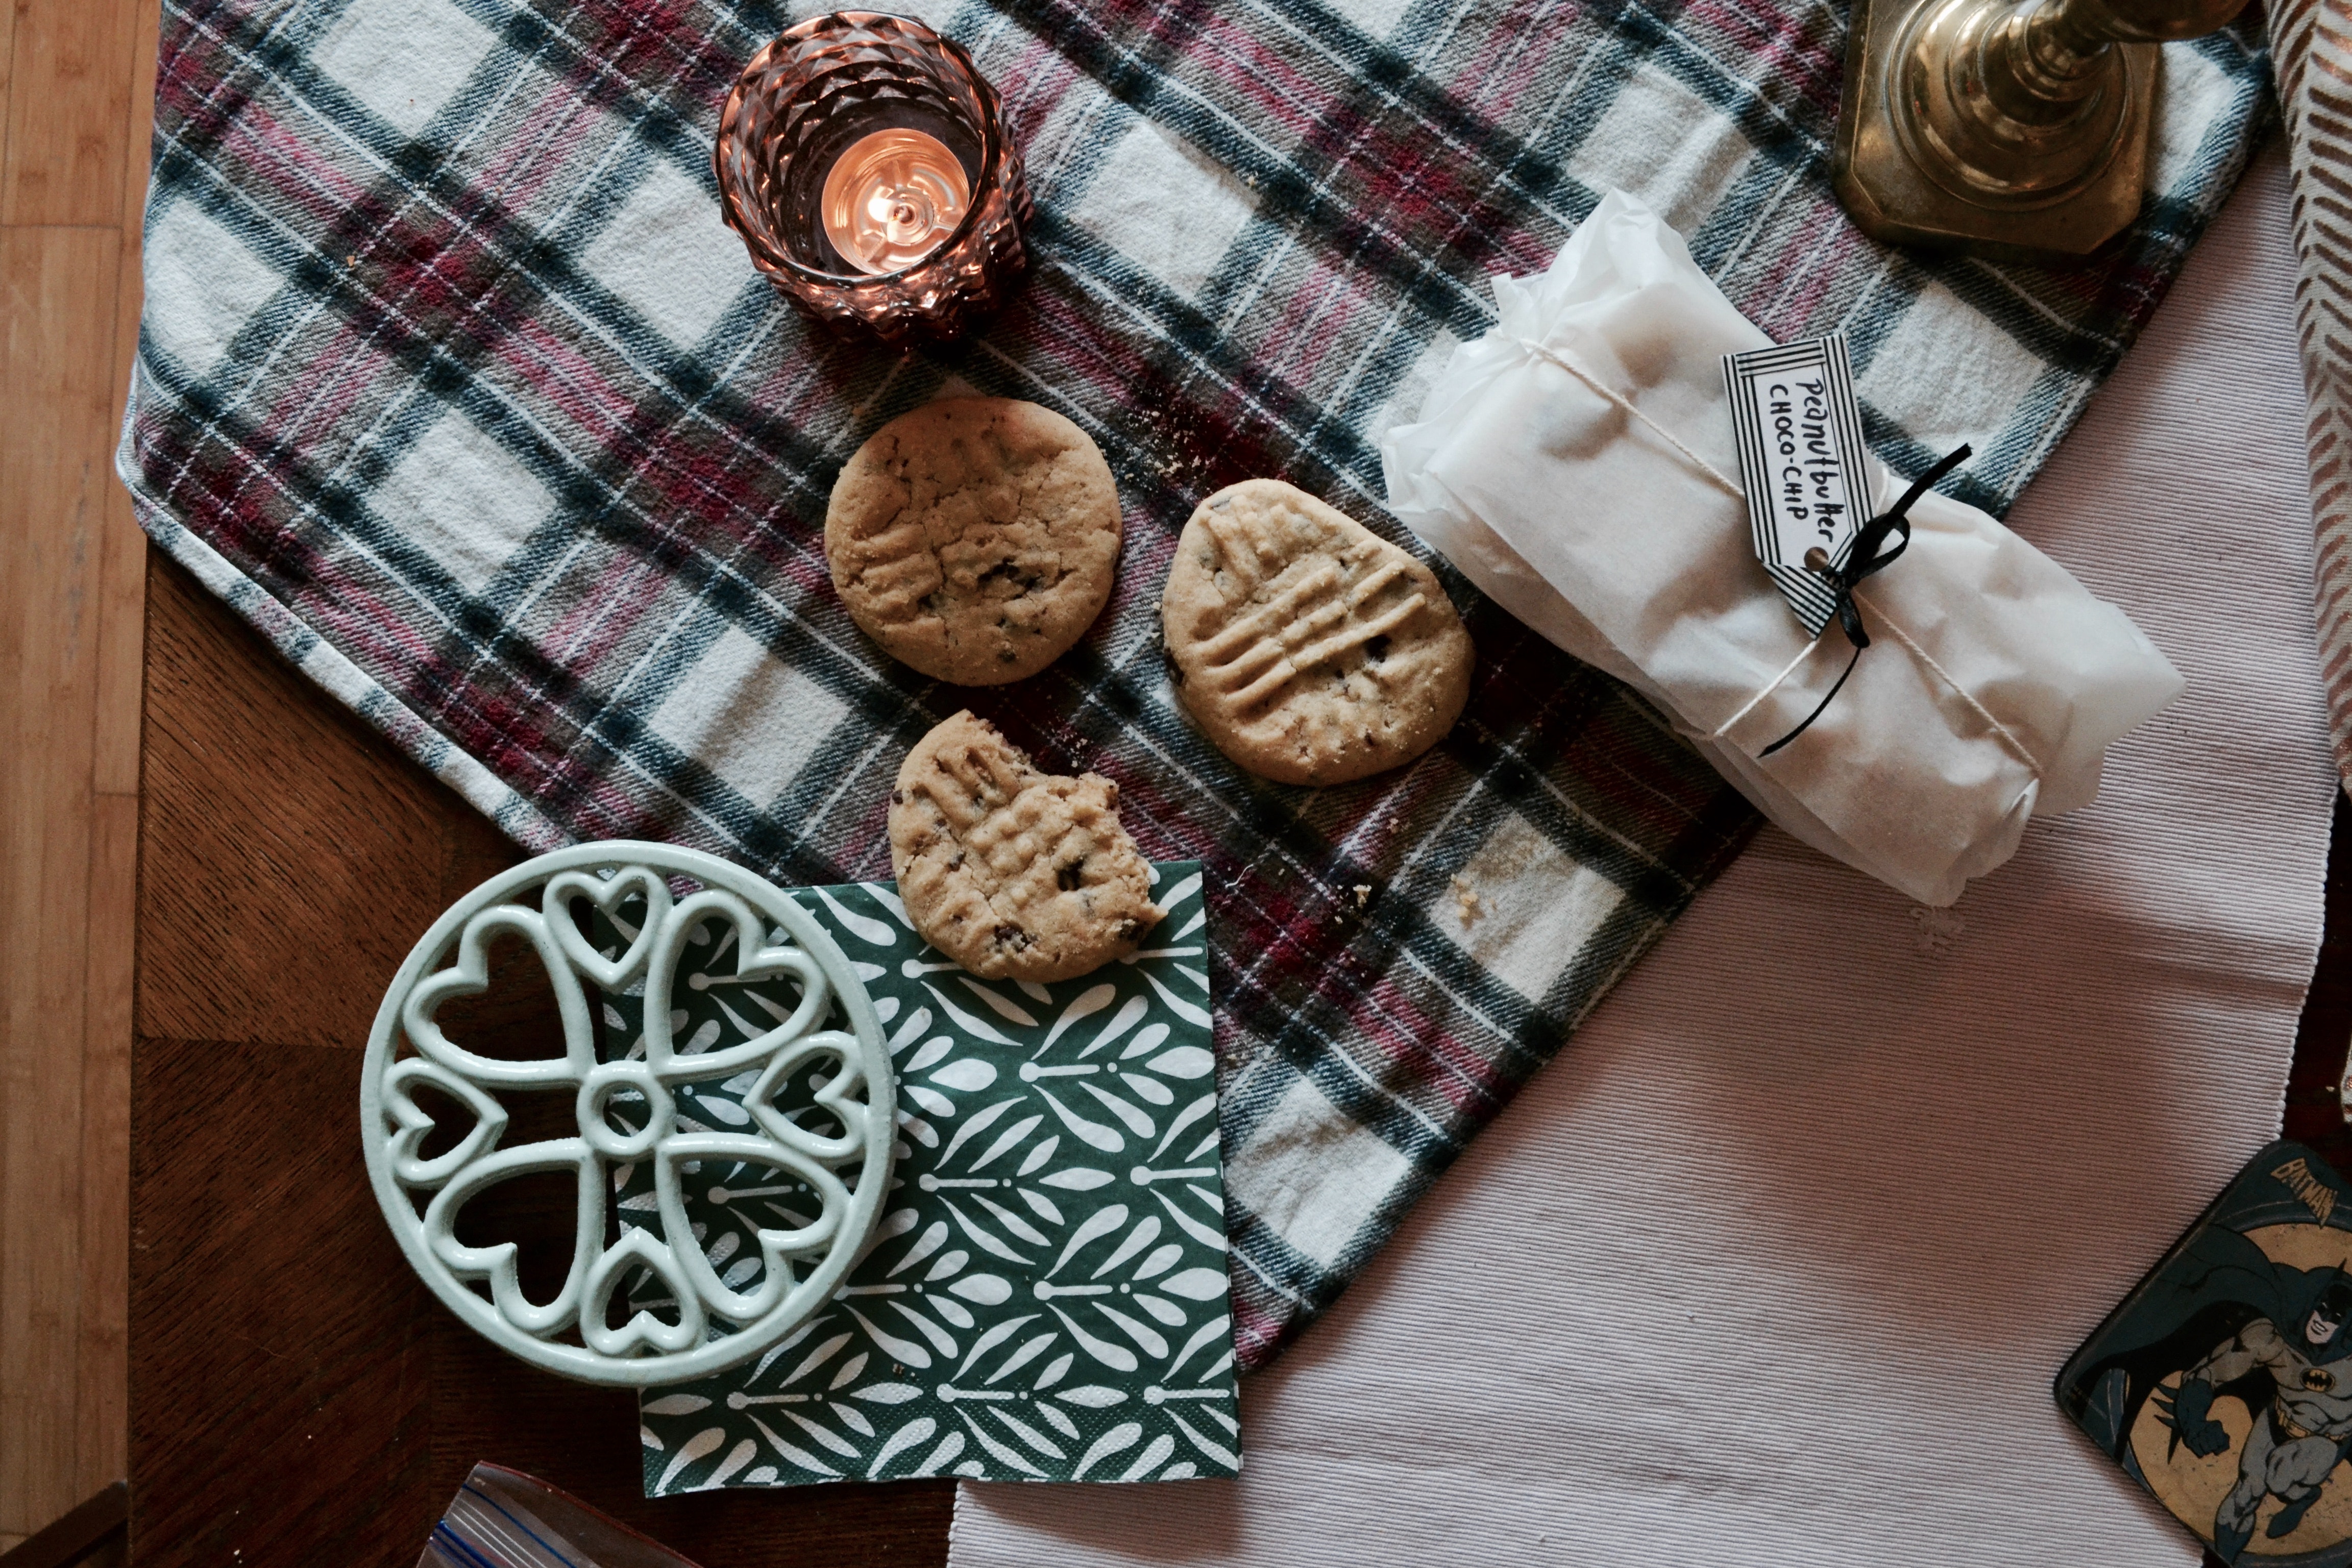 Cookies on a Plaid Mat, Bake, Pastry, Wooden, Wood, HQ Photo